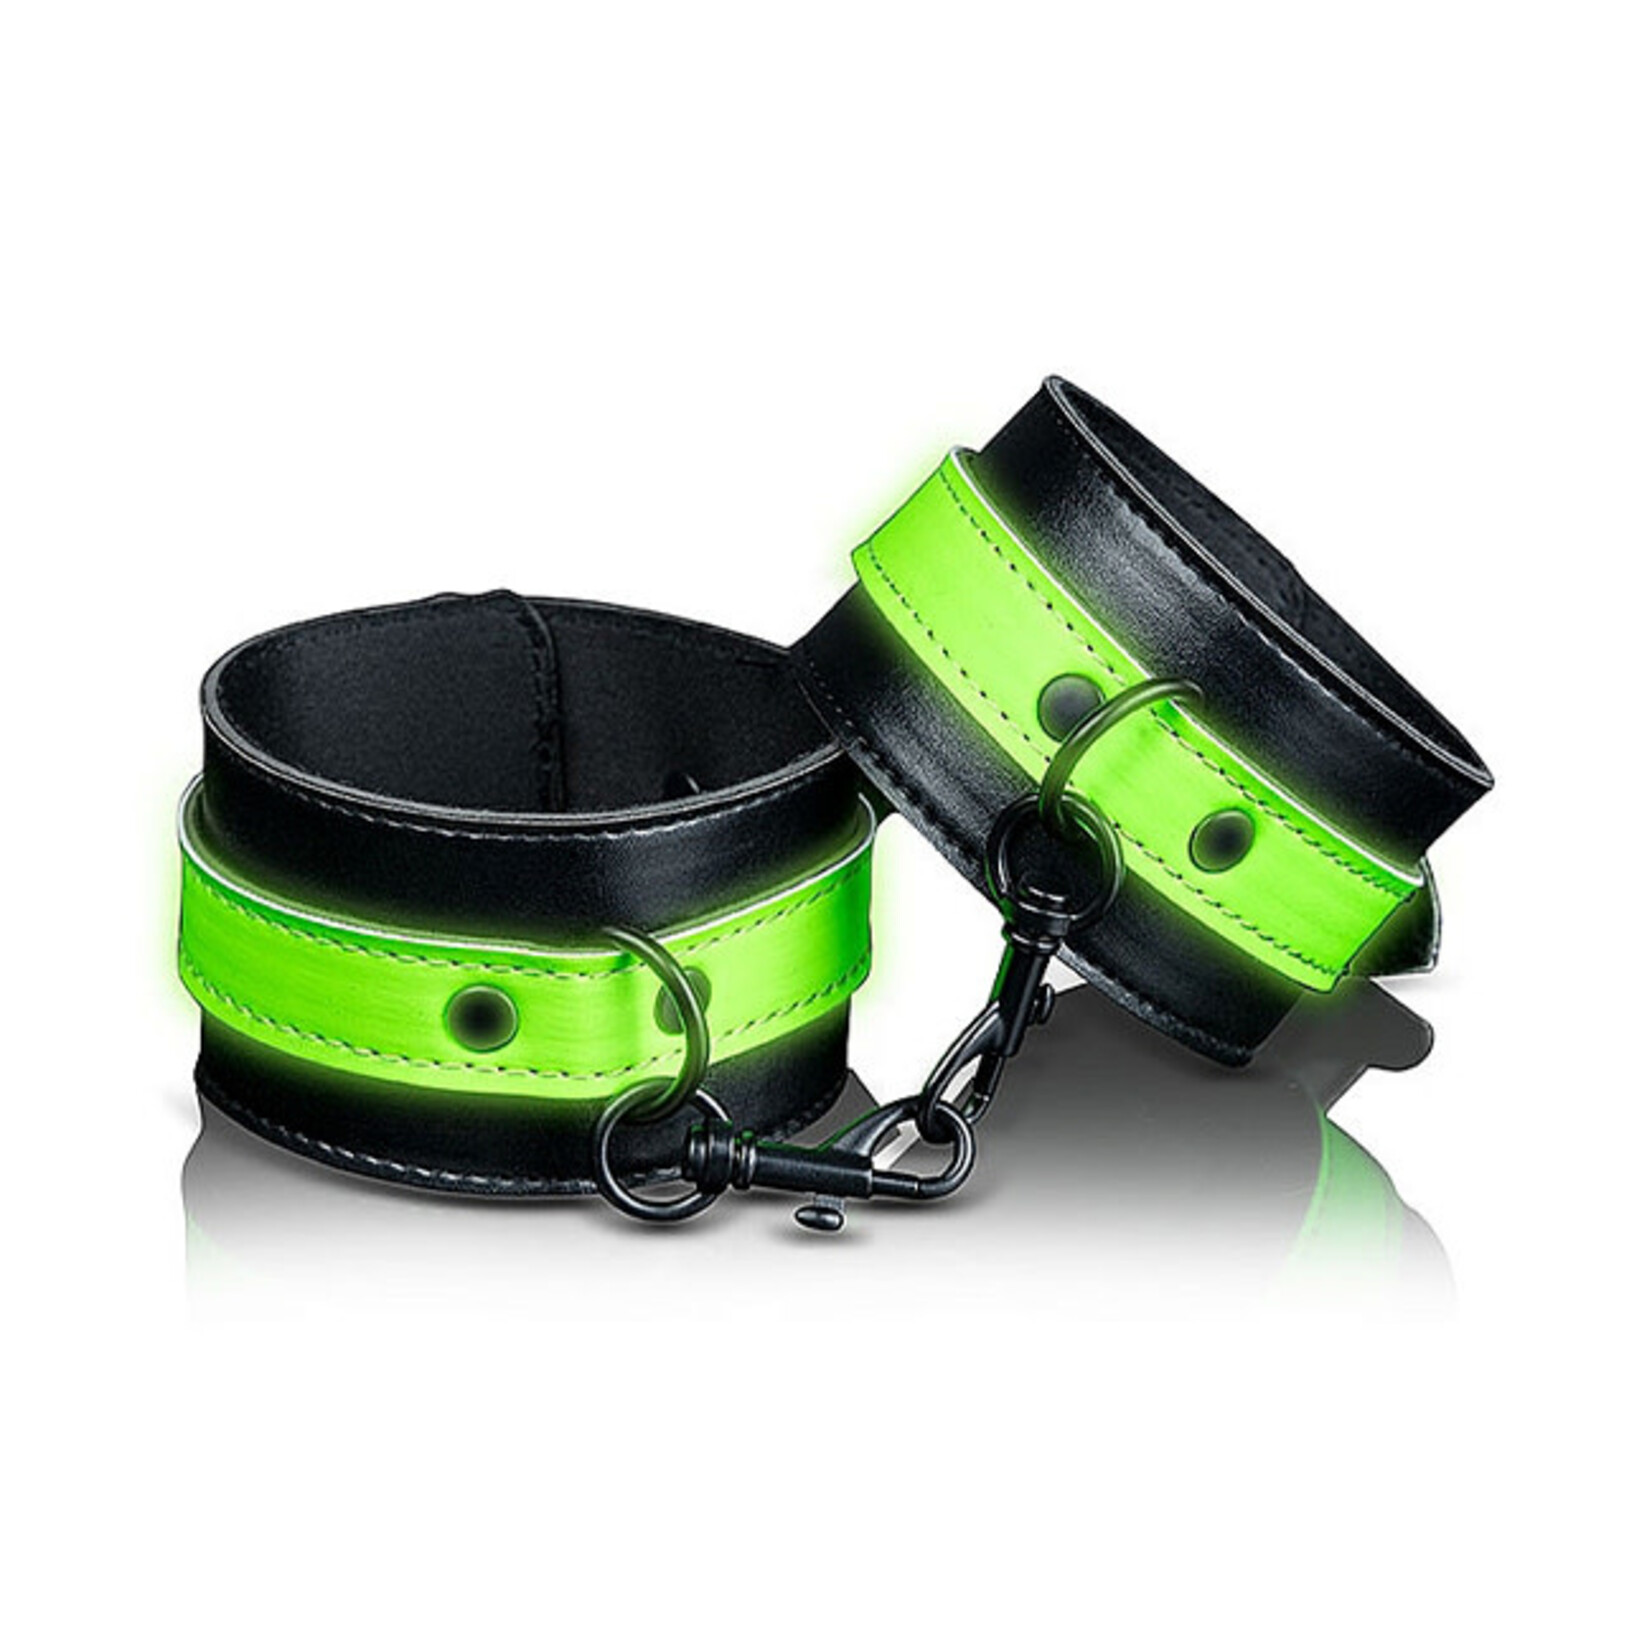 Shots America Ouch! Glow in the Dark Ankle Cuffs